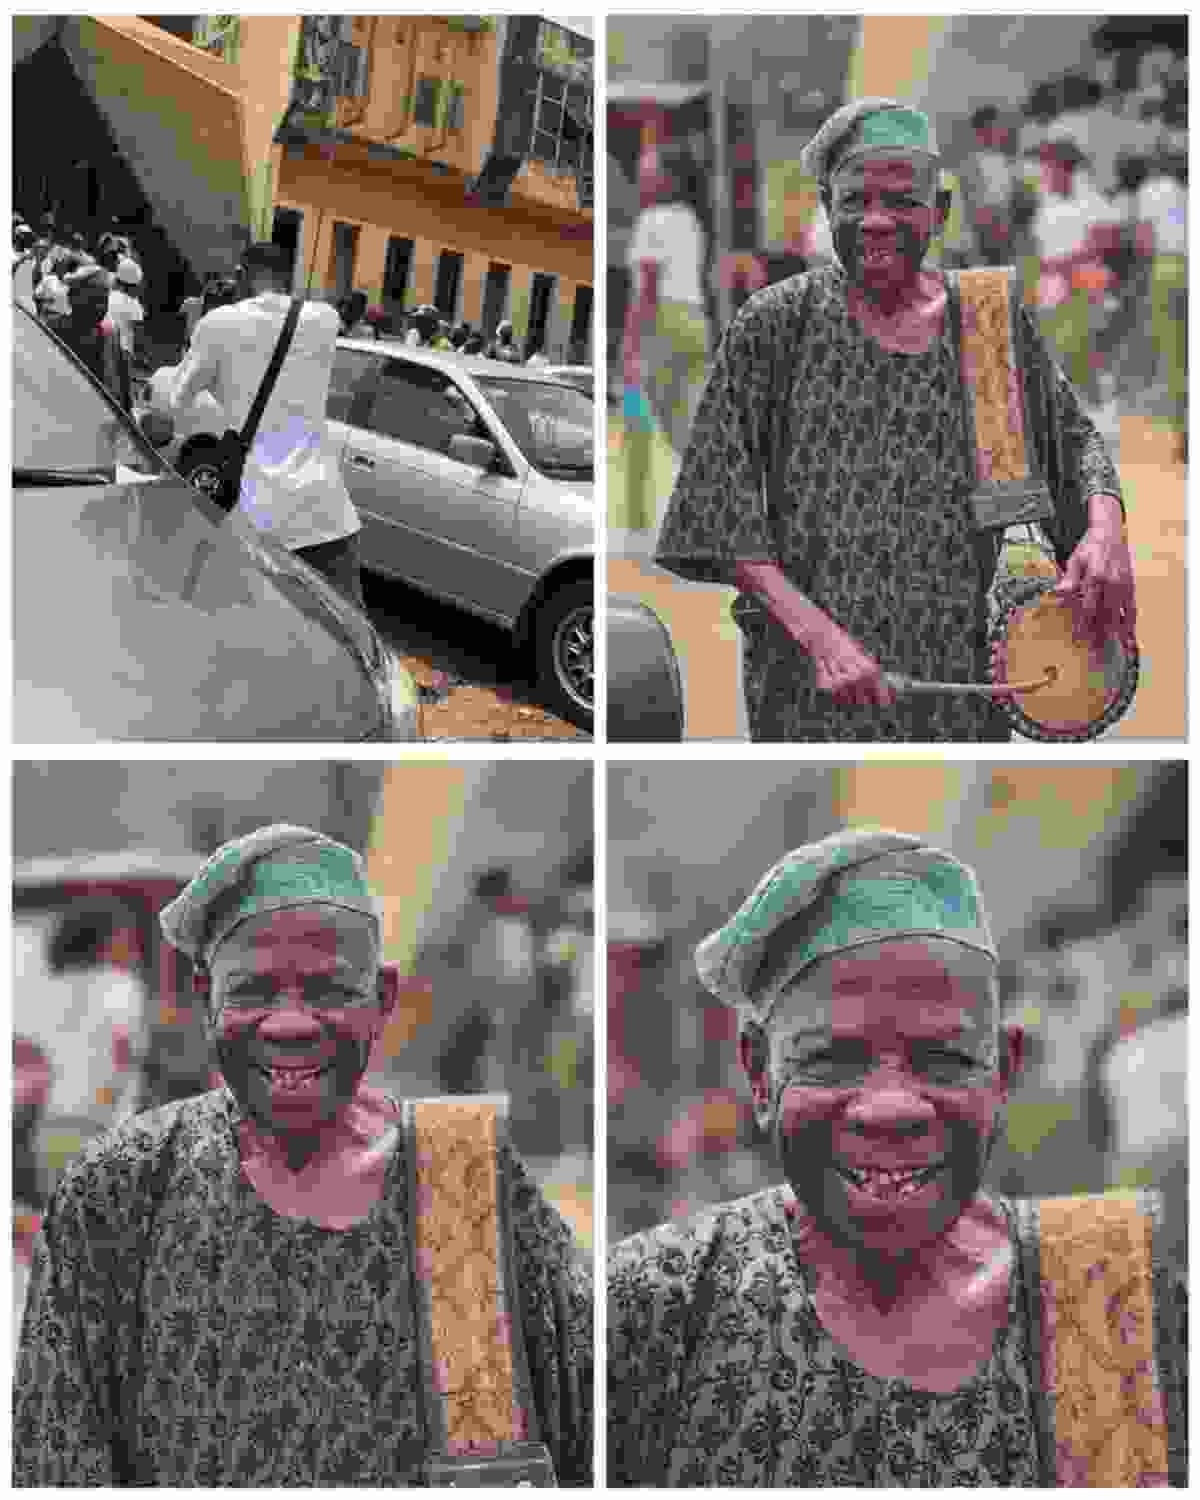 Baba Onilu NFT: Nigerian Youth Services Corps Captured A Portraits Of An Elderly Drummer ‘Baba Onilu’ & Sold Them as NFT